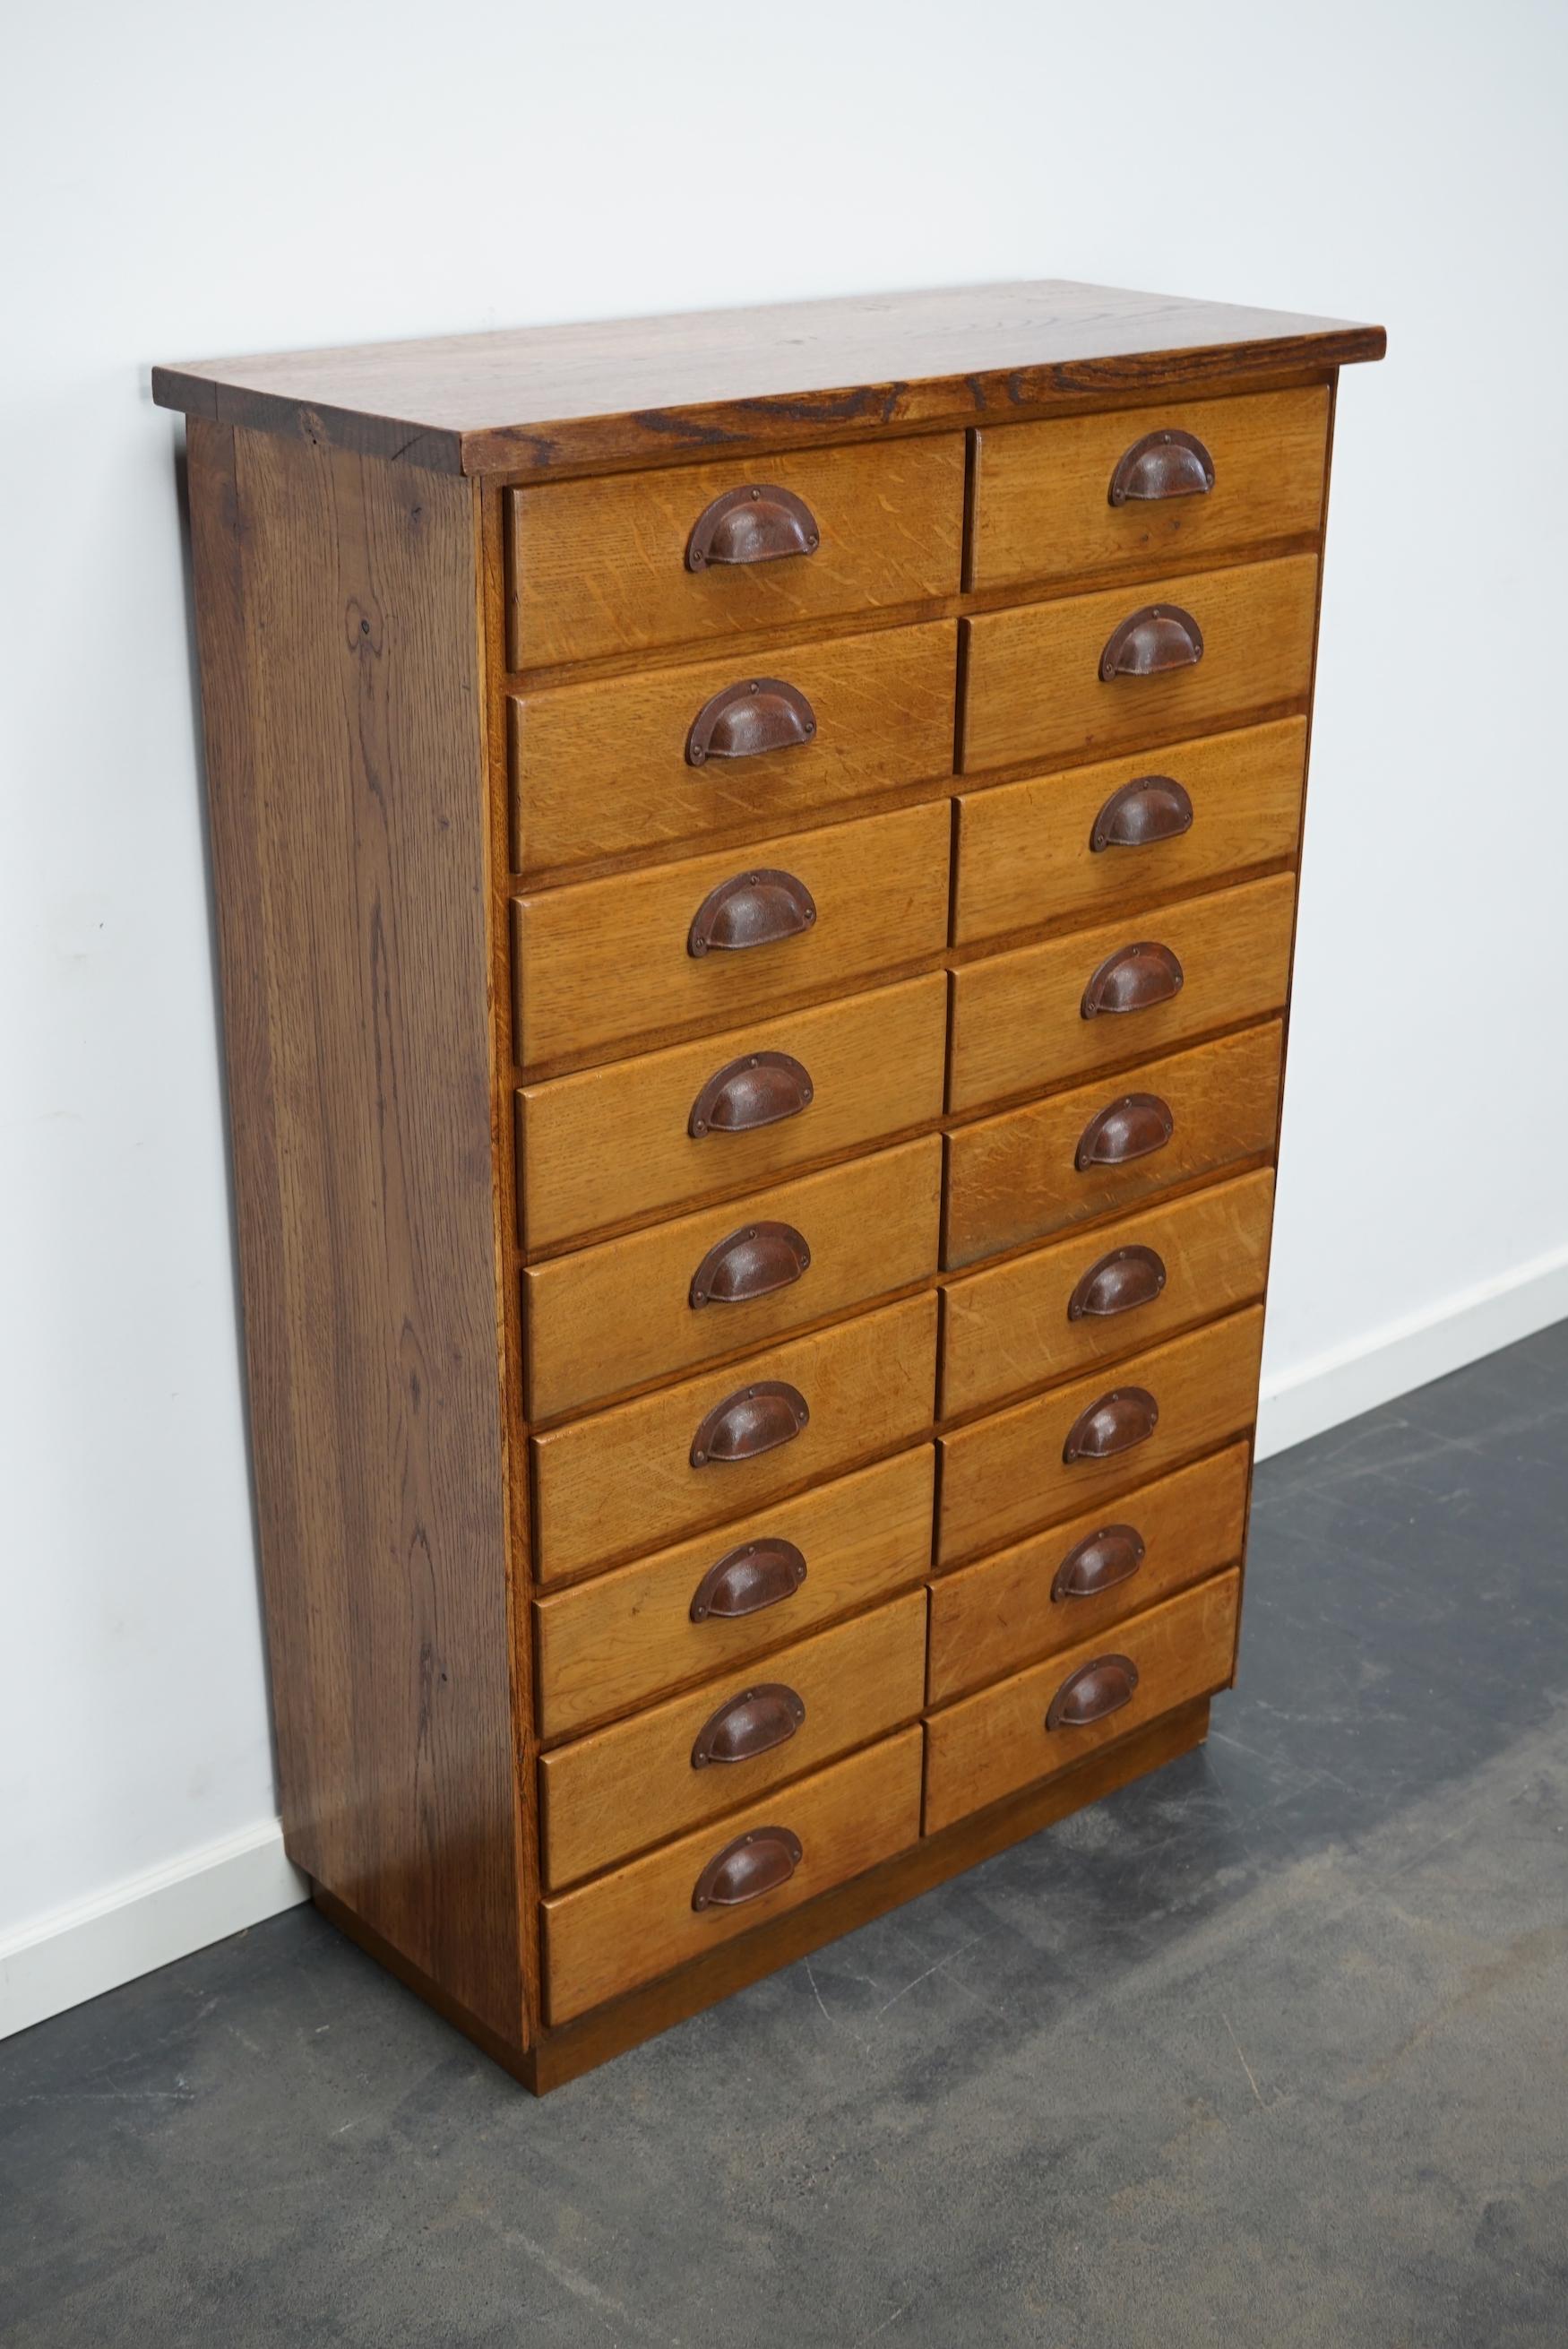 This apothecary cabinet was made from oak circa 1940 / 1950s in Germany. It features 18 drawers with nice metal handles. The interior dimensions of the drawers are: D W H 24 x 27 x 7 cm.